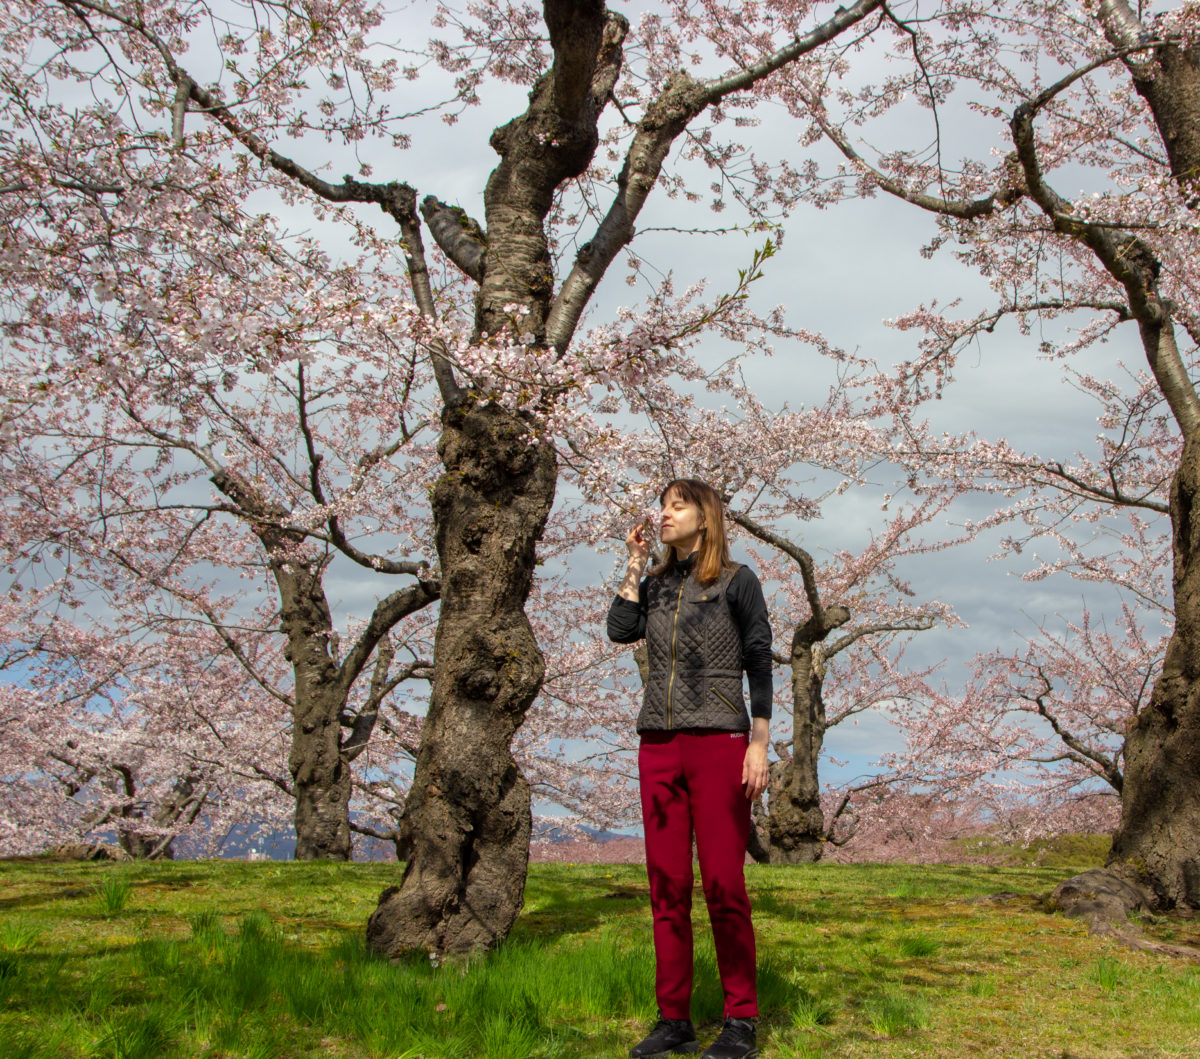 My Life-Changing Cherry Blossom Tours in Japan